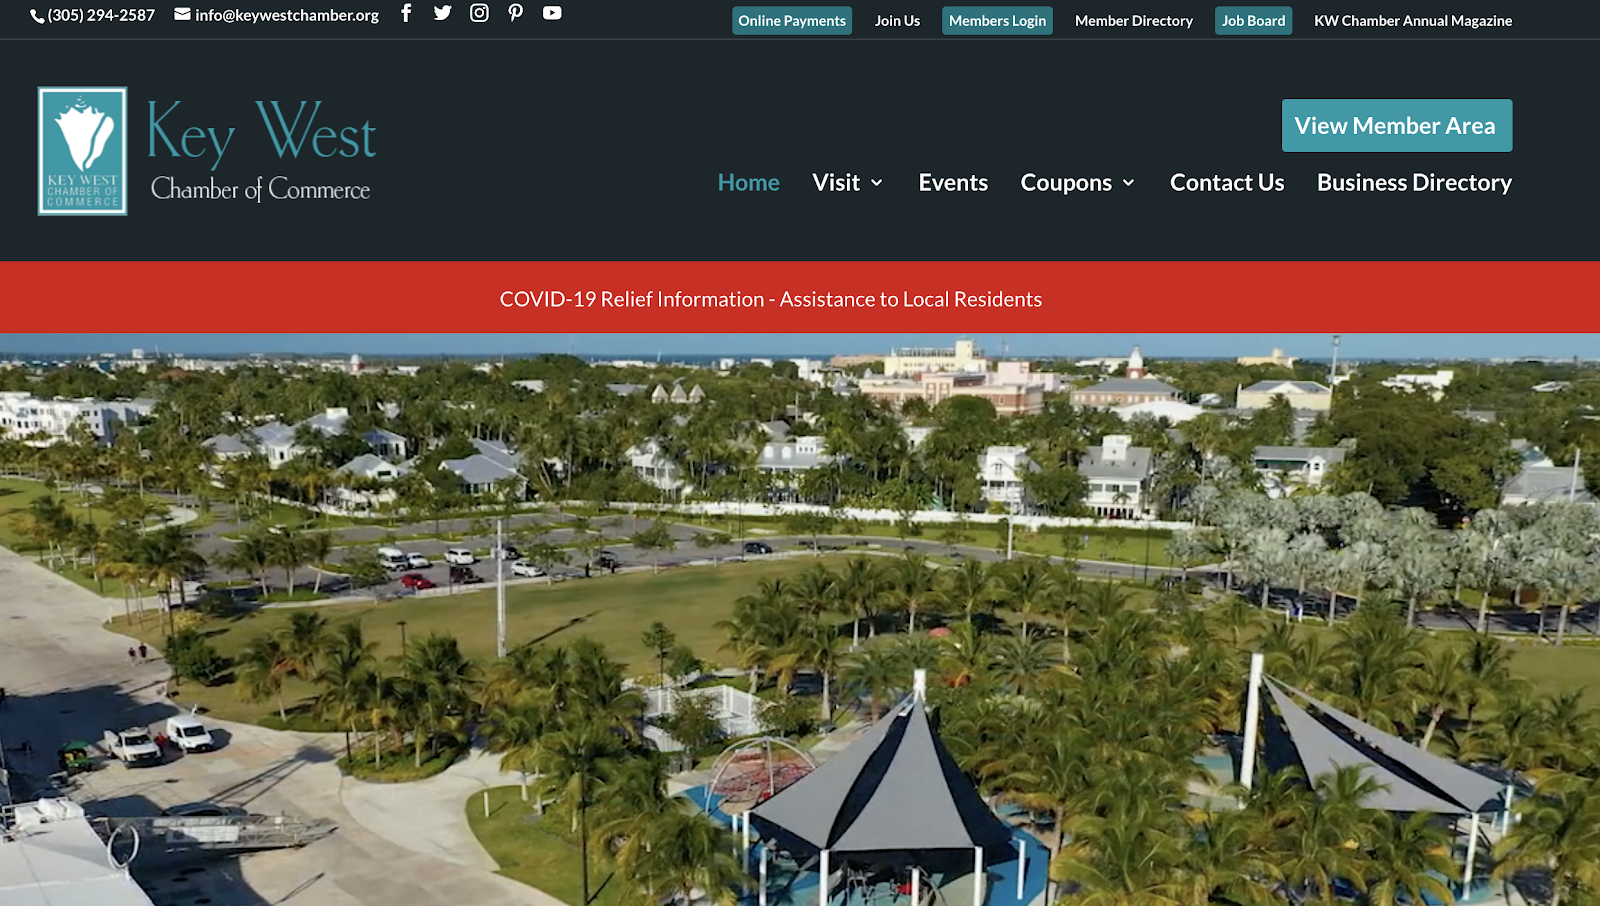 Key West Chamber of Commerce website showing a highlighted button in the top navigation labelled "View Member Area".